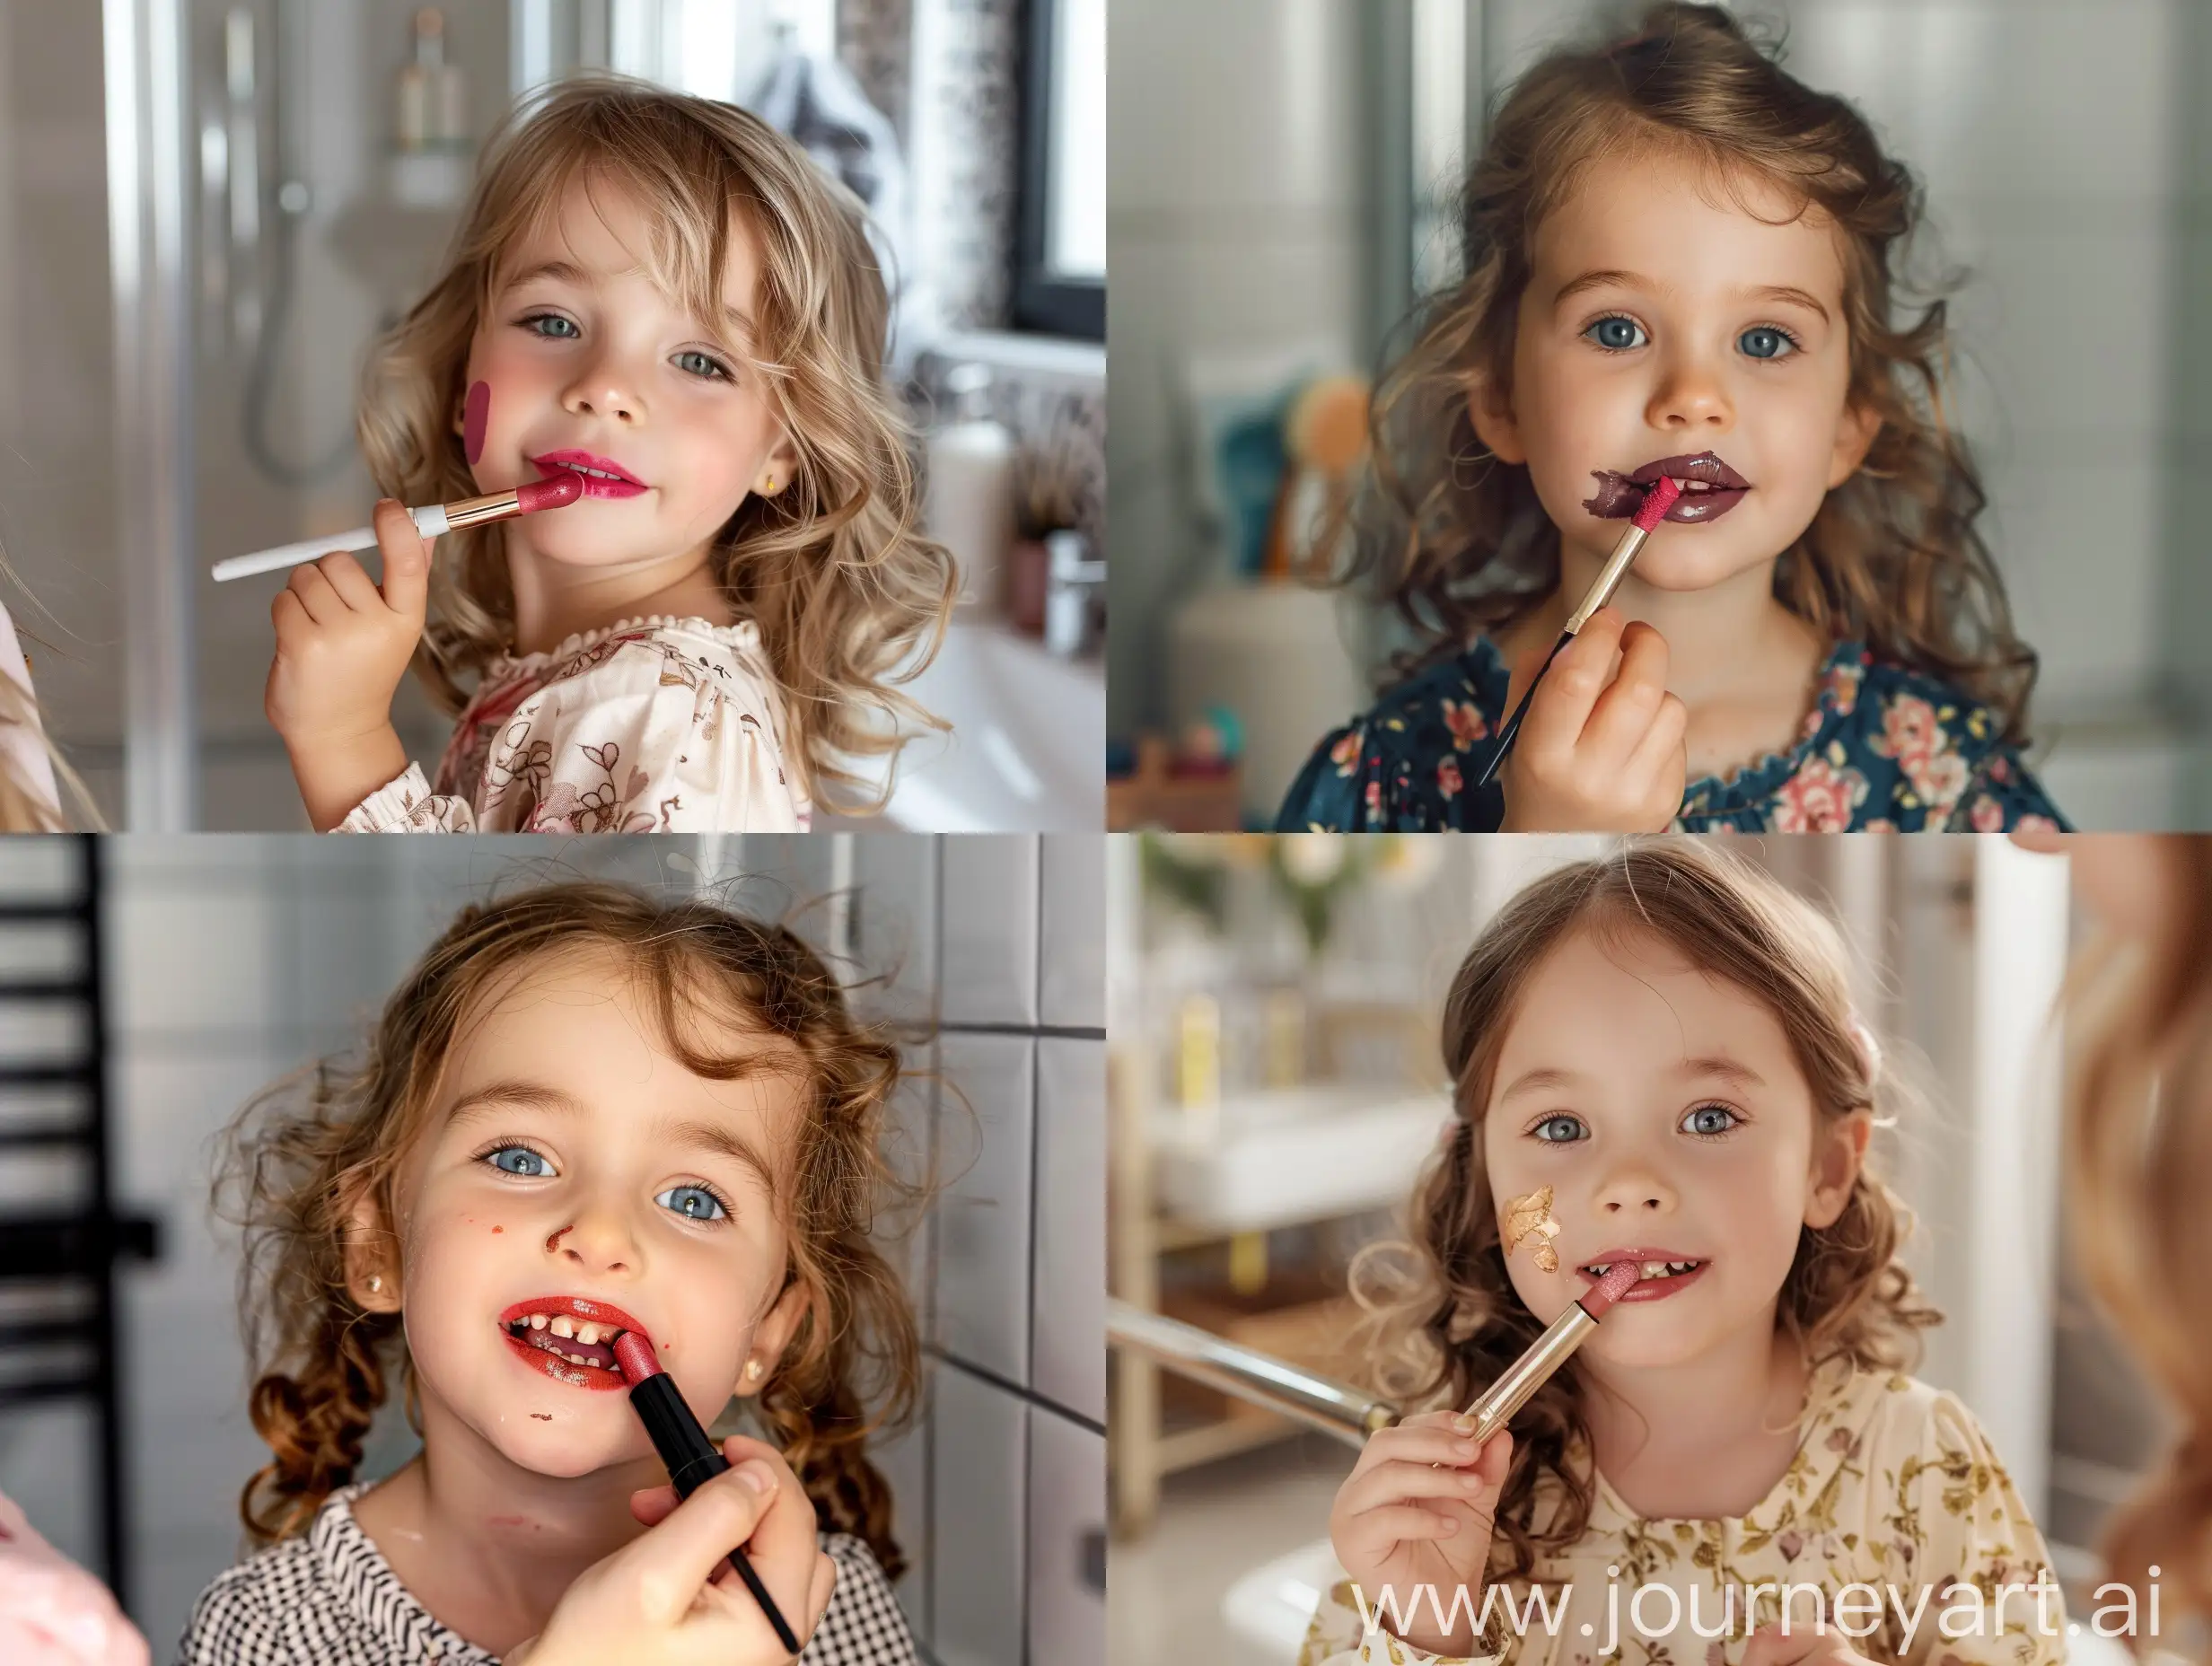 Little 4 years old girl paints her lips with lipstick borrowed from her mother in the bathroom, smile 